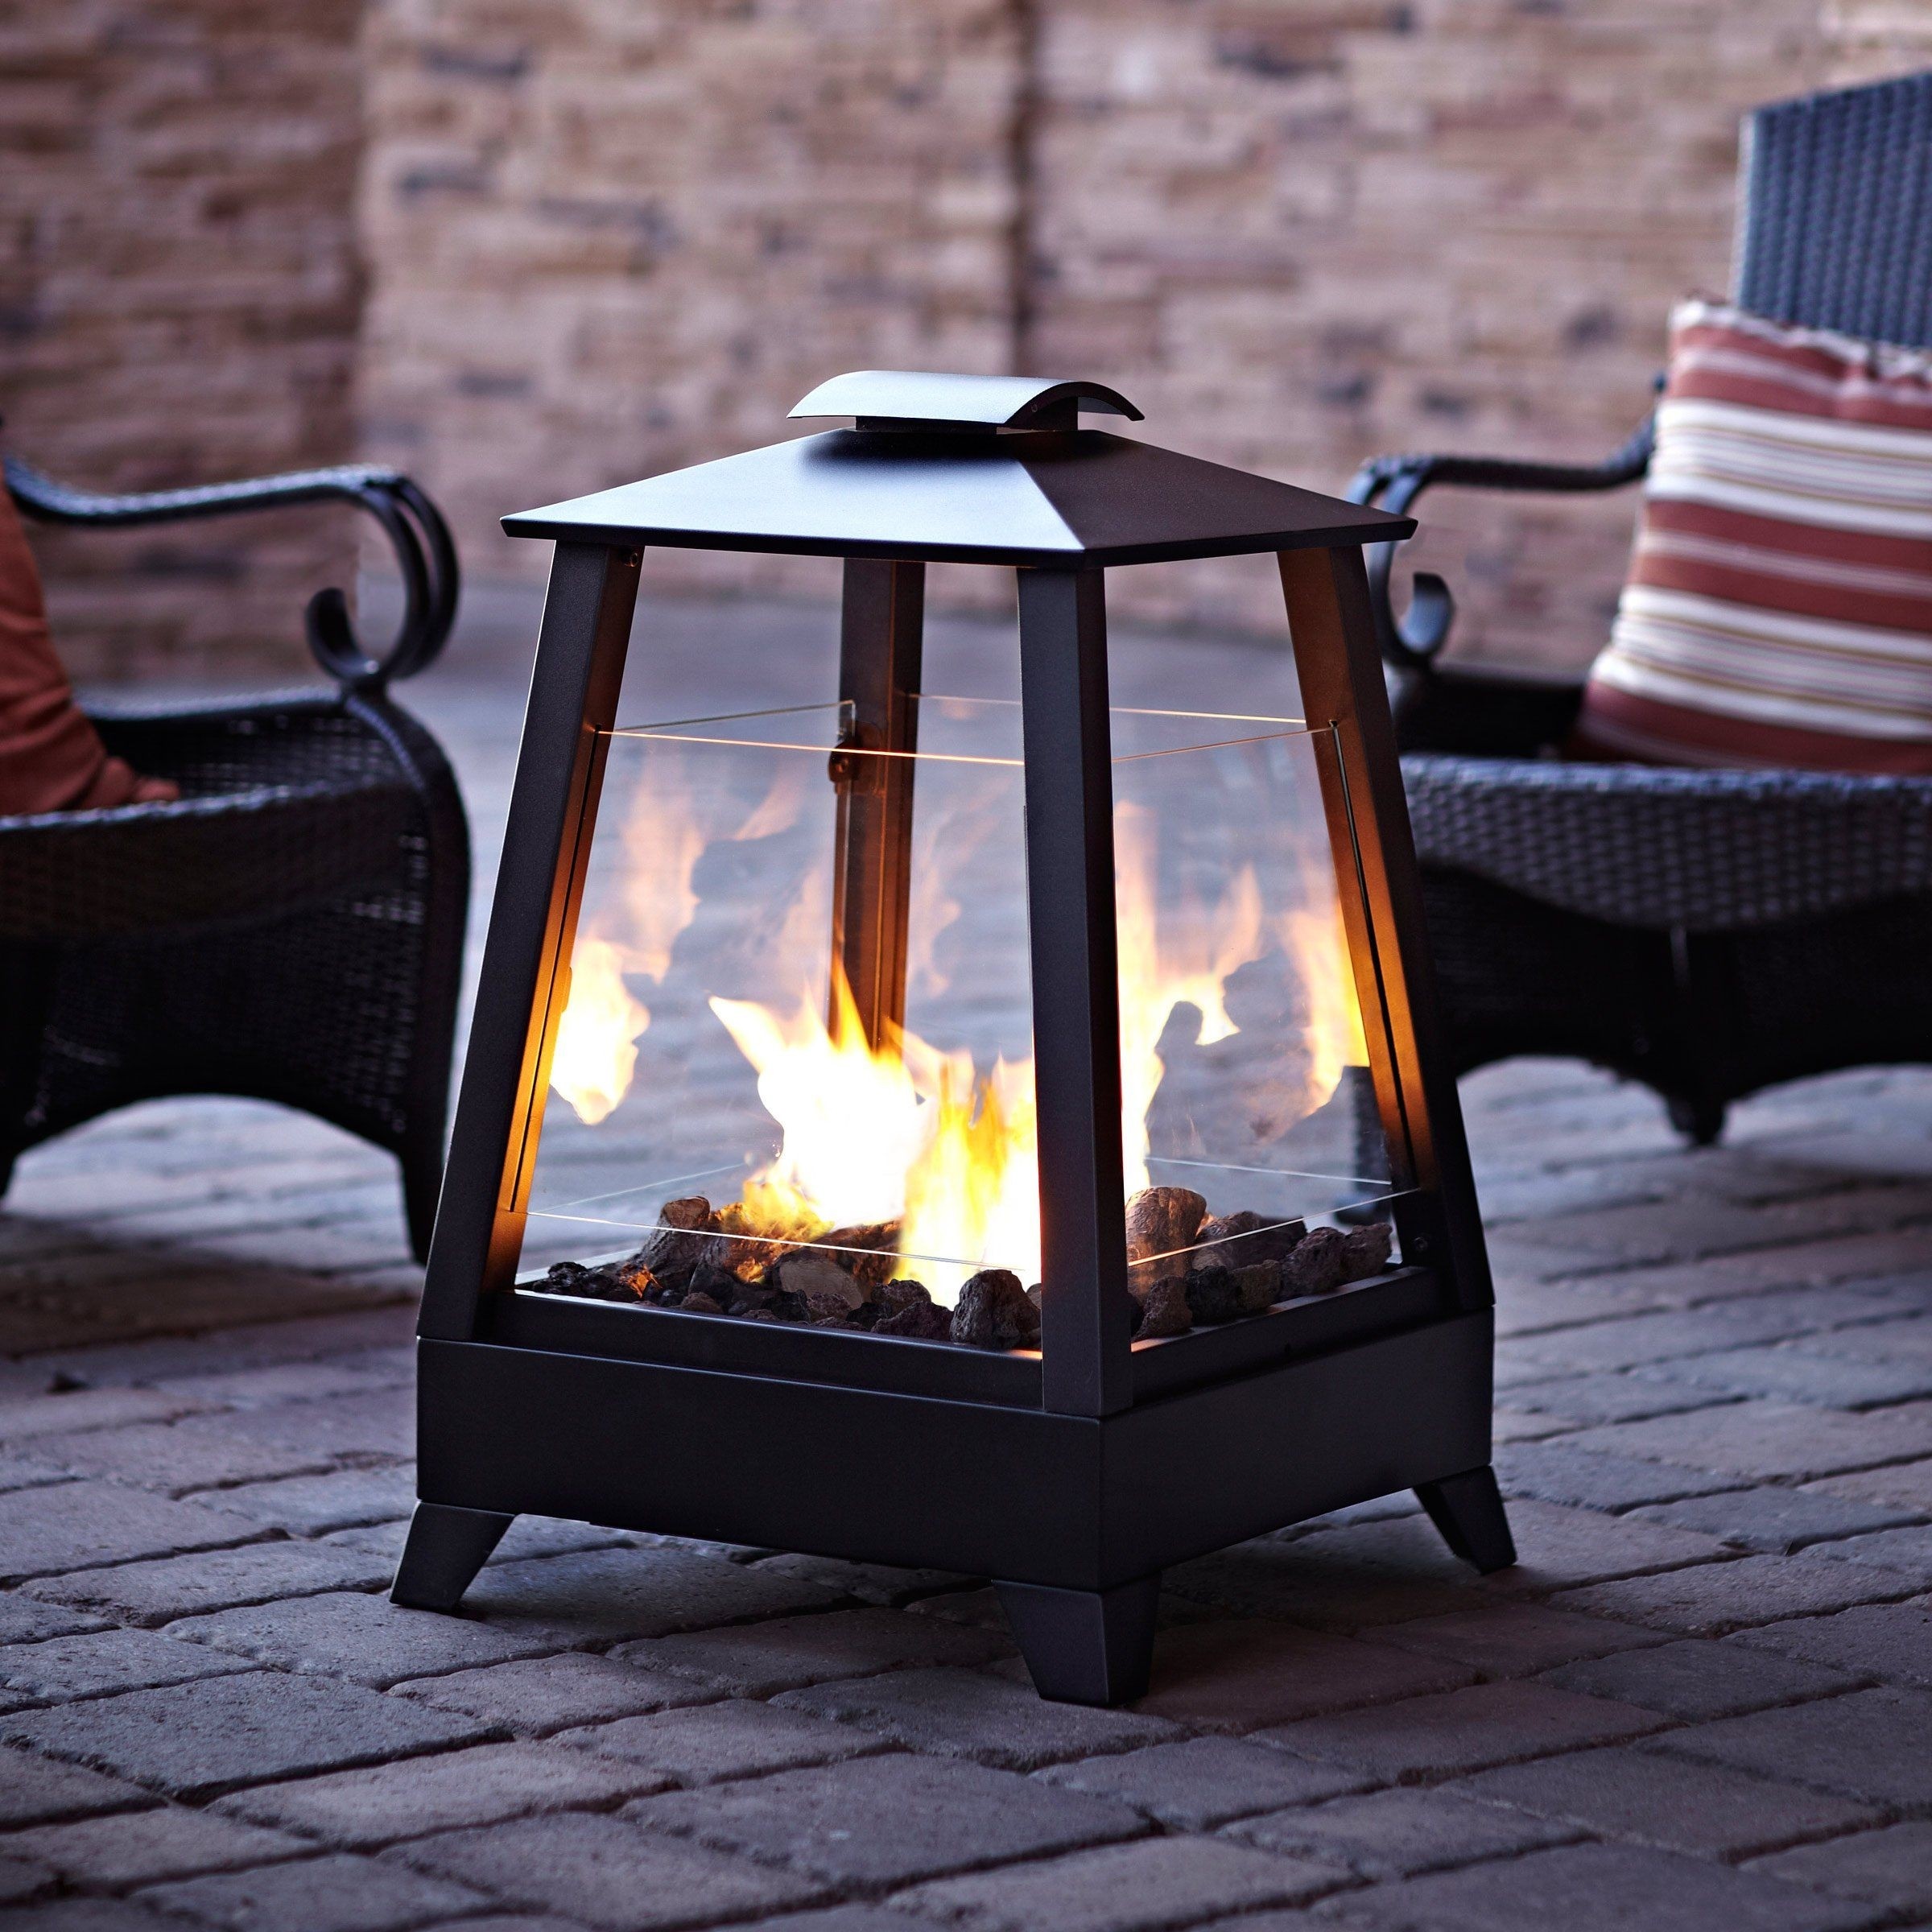 Portable fireplace outdoor